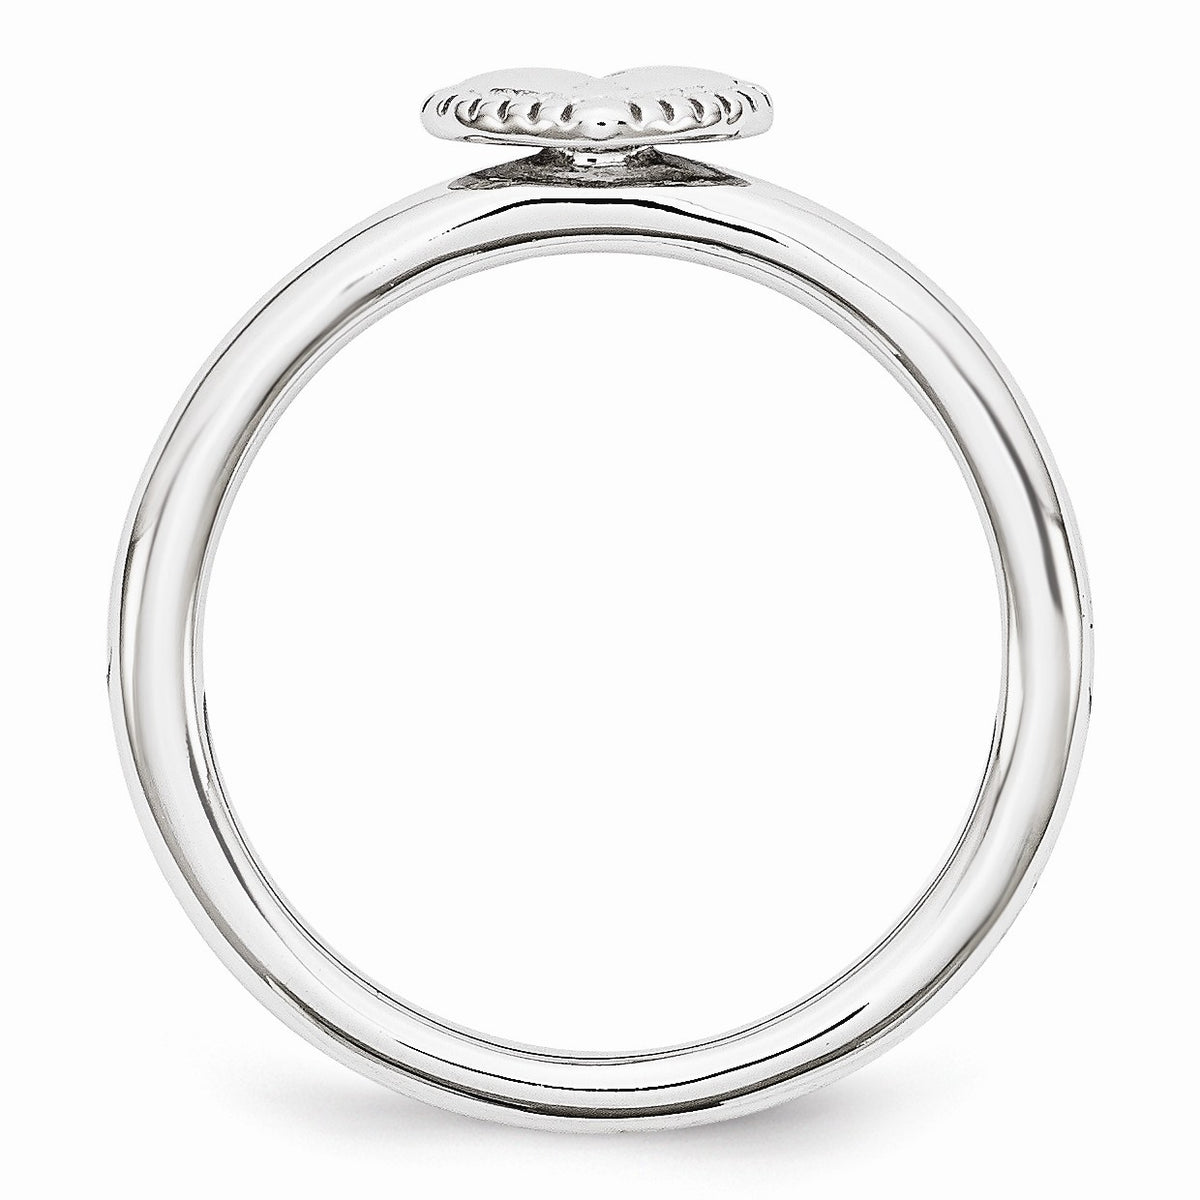 Alternate view of the Rhodium Plated Sterling Silver Stackable 7mm Heart Padlock Ring by The Black Bow Jewelry Co.